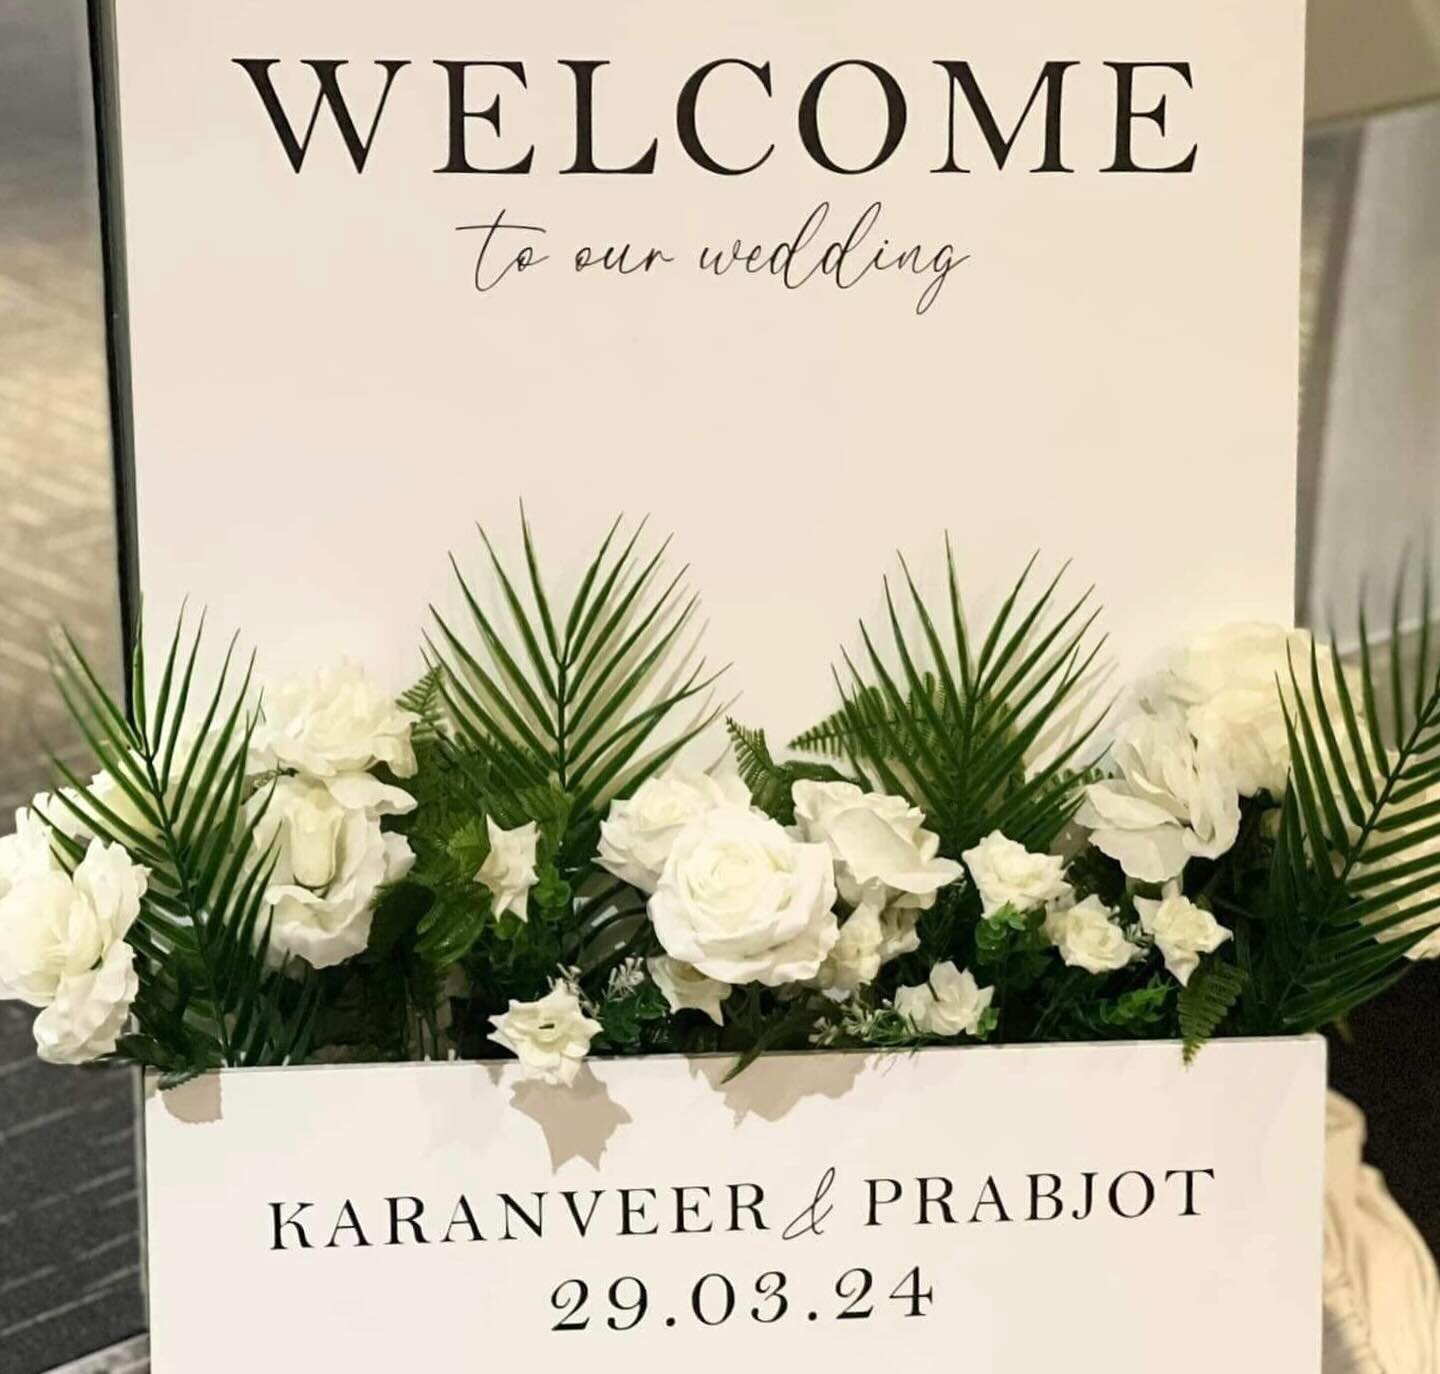 Quite possibly the largest, most extravagant wedding we&rsquo;ll ever attend 🤩 Over 300 guests were welcomed by our sign, how cool is that?! 🥰 Absolutely incredible planning by @sparklingeventsnz ⭐️